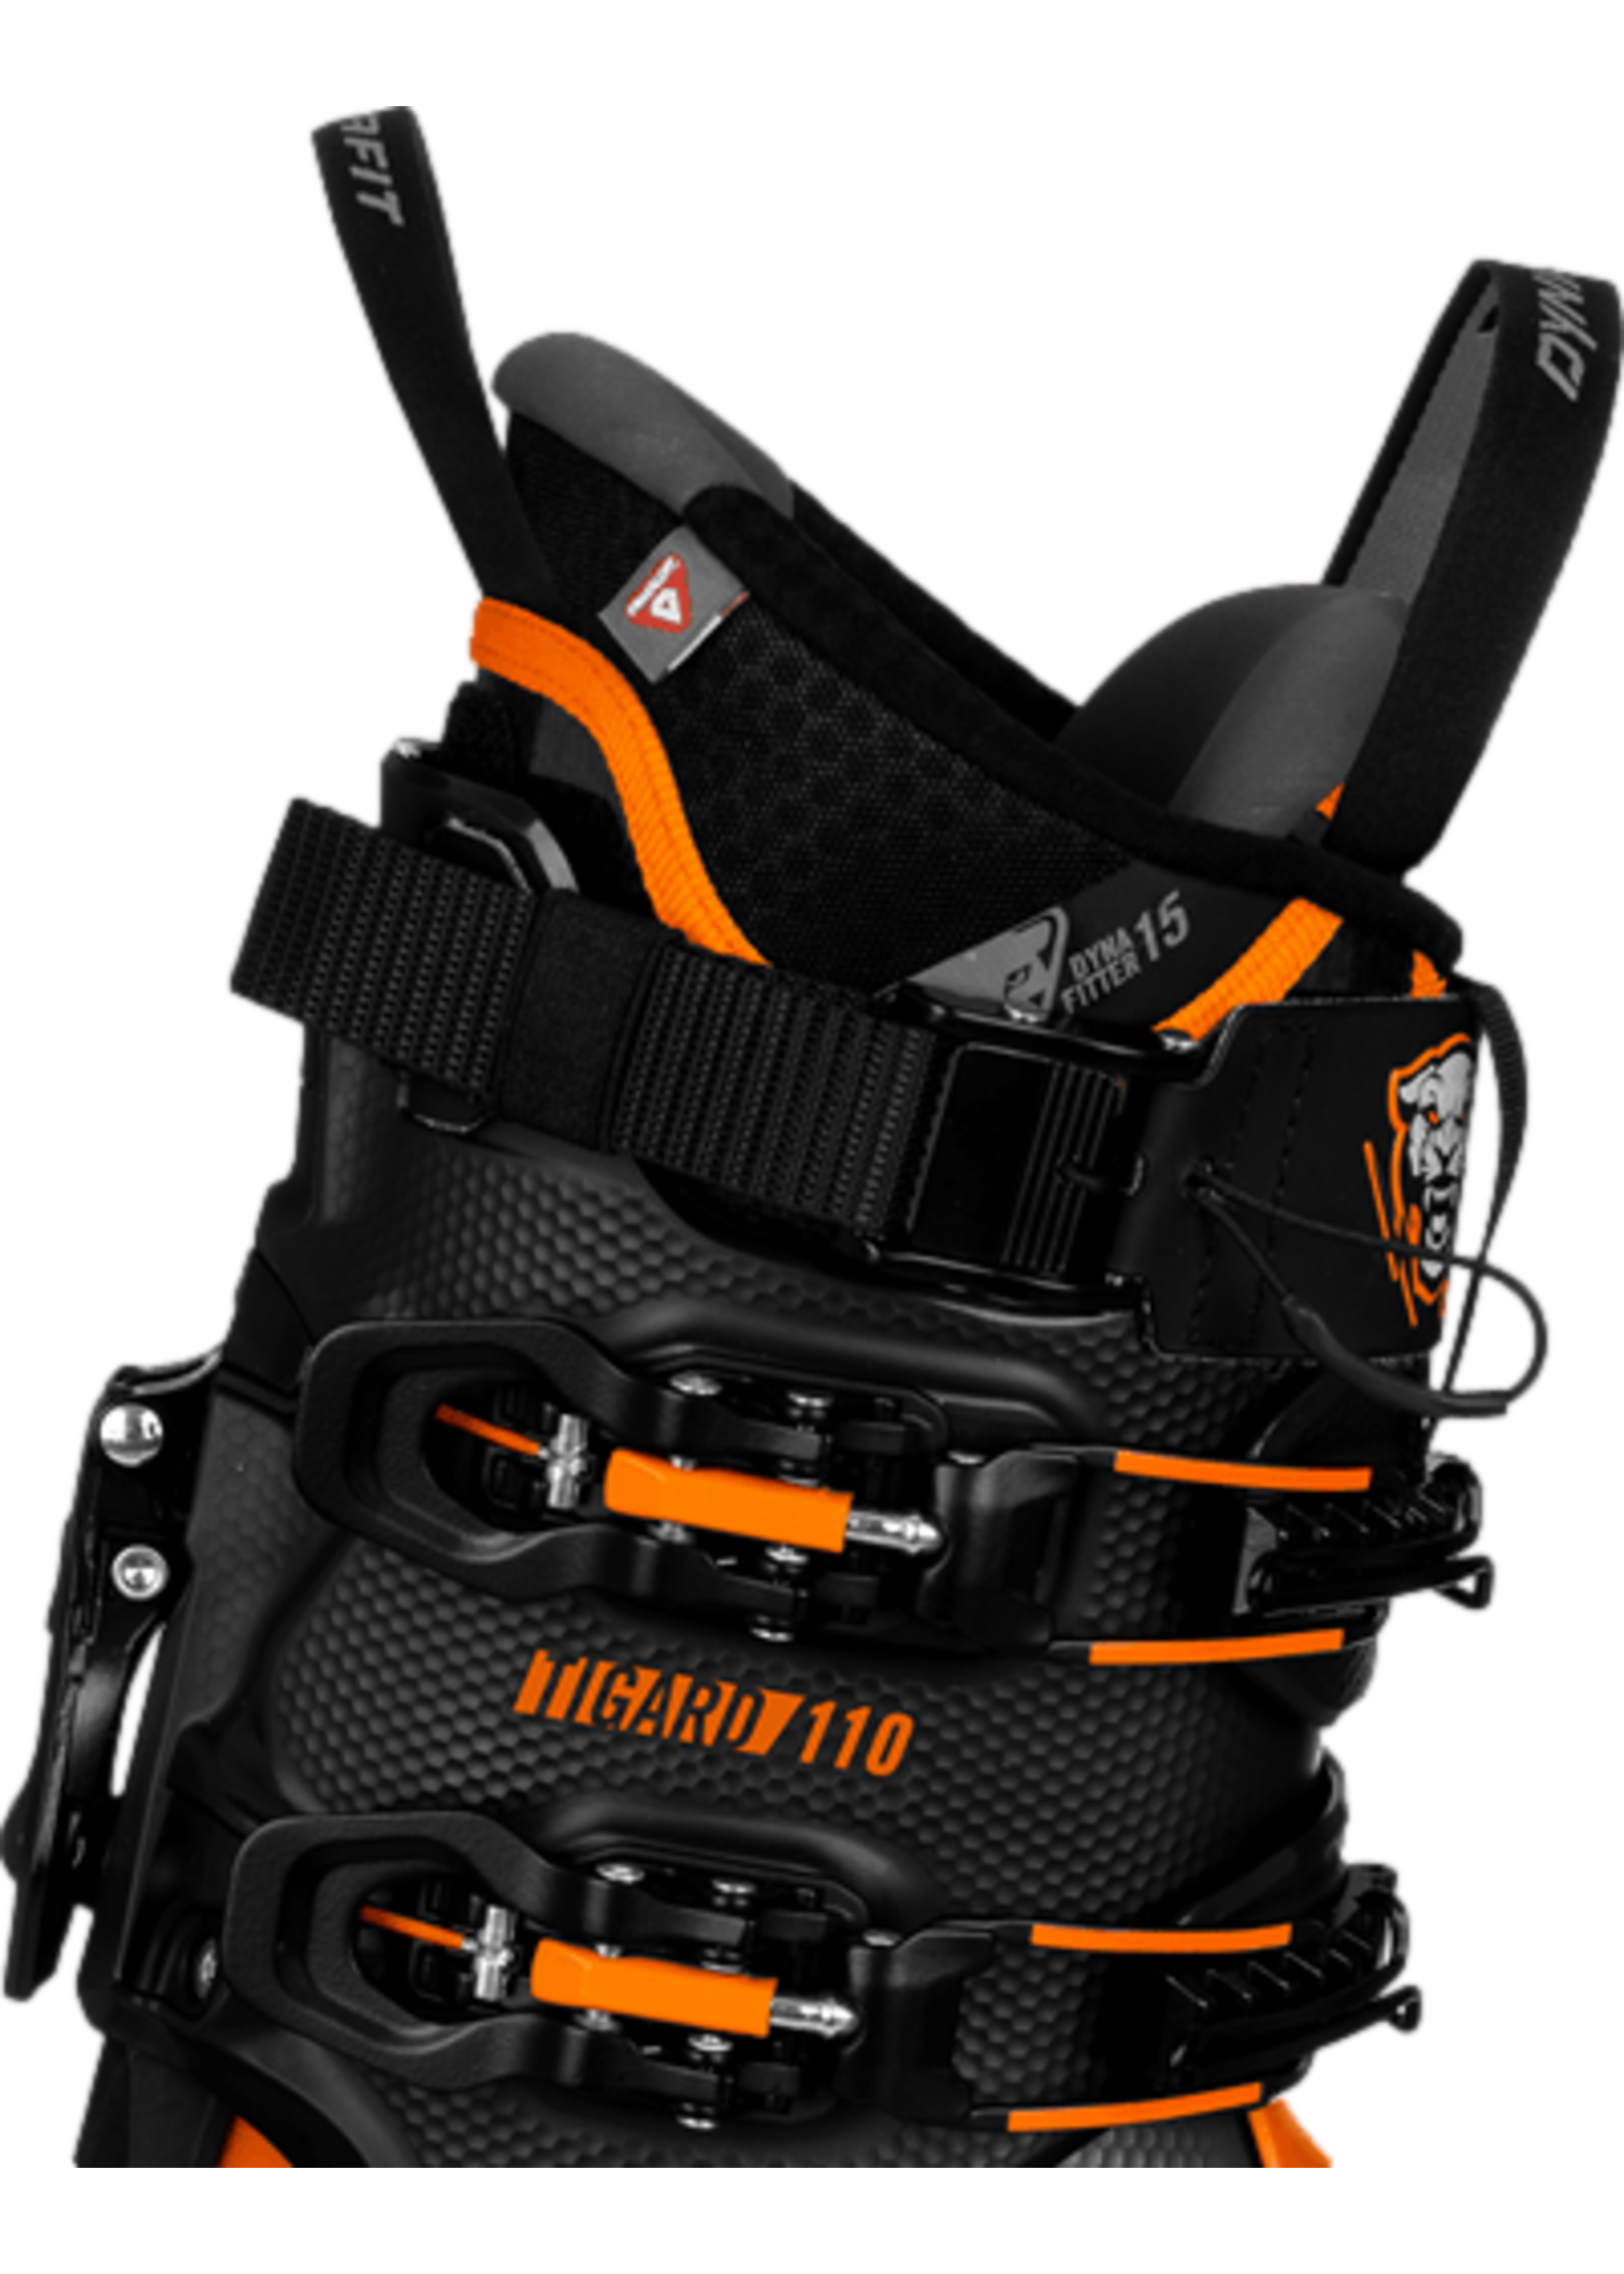 Dynafit Touring Boot Tigard 110